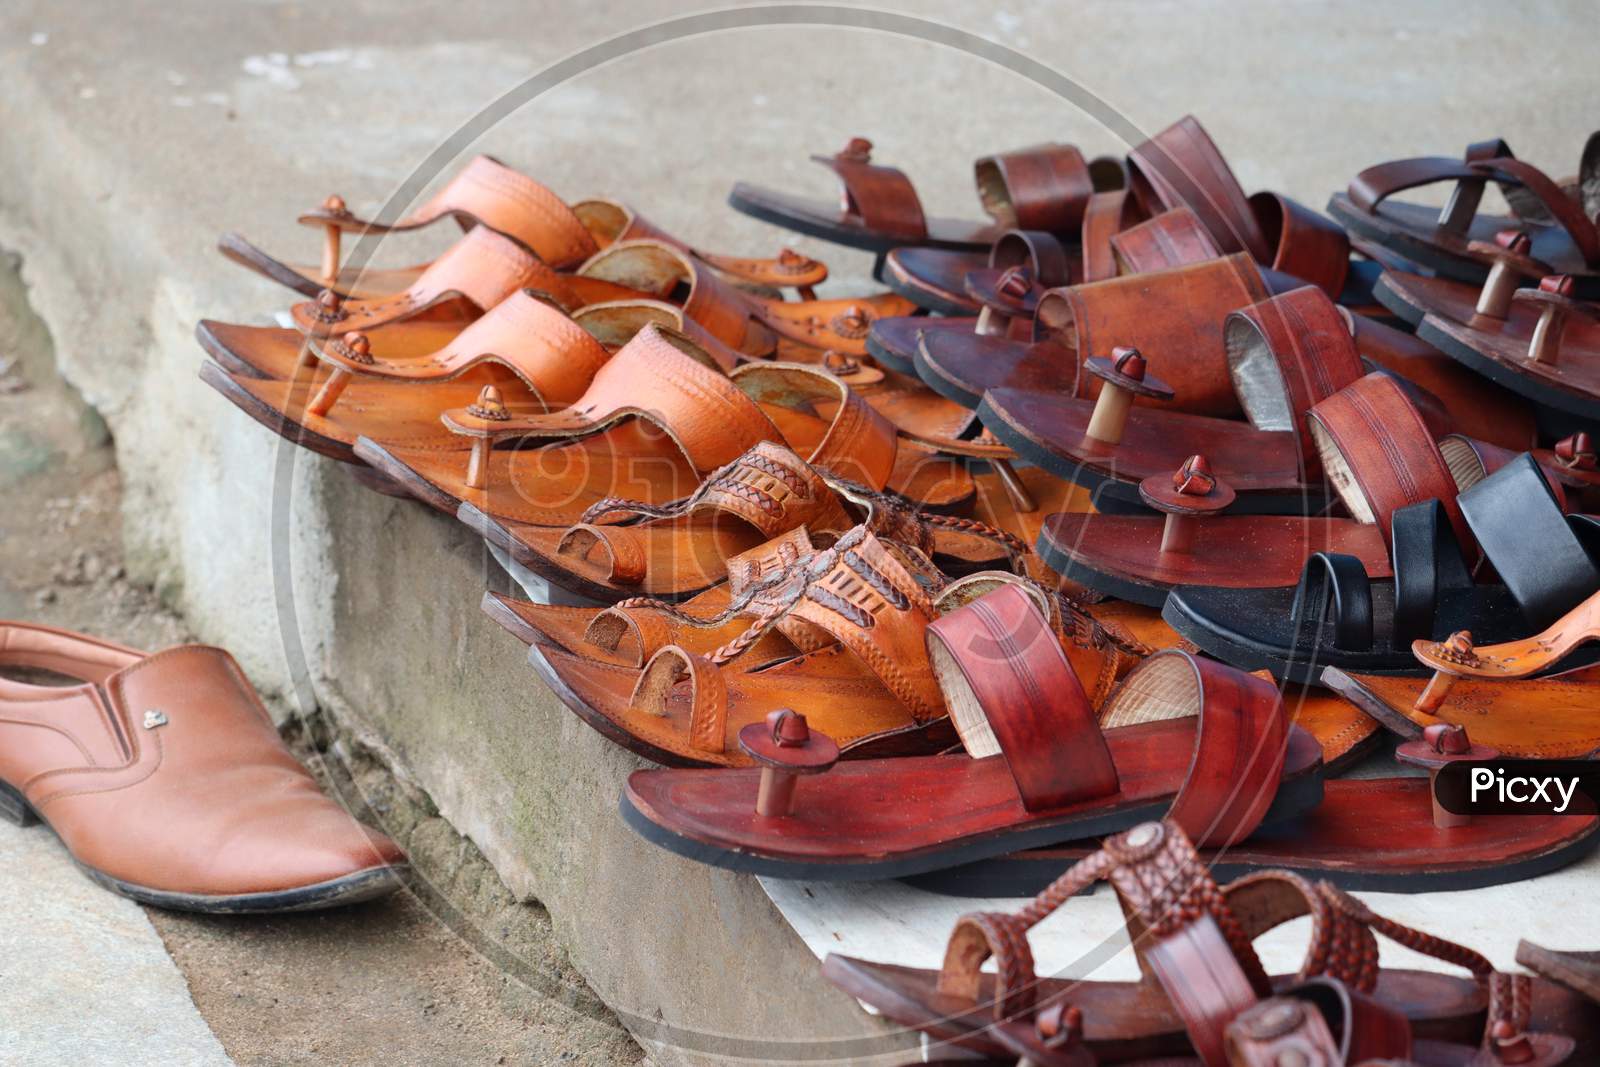 Chennai , Tamil Nadu, India. Oct 23, 2020 .Attractive Leather Sandals Of Beautiful Workmanship Decorated At The Retail Shop For The Upcoming Festivities